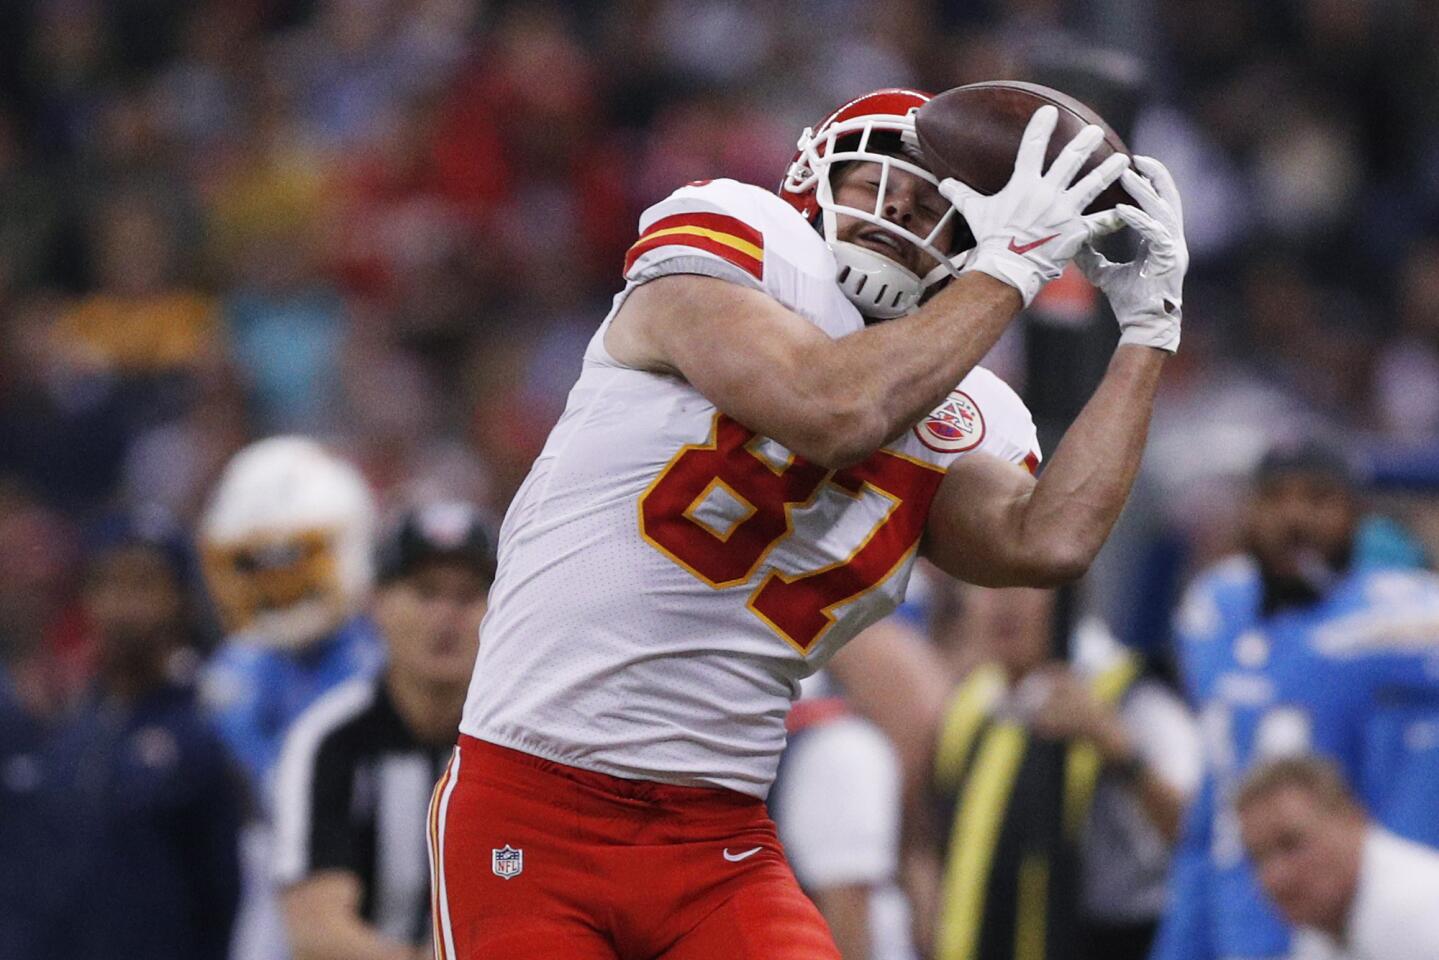 Chiefs tight end Travis Kelce hauls in a pass against his helmet during a game against the Chargers on Nov. 18 in Mexico City.